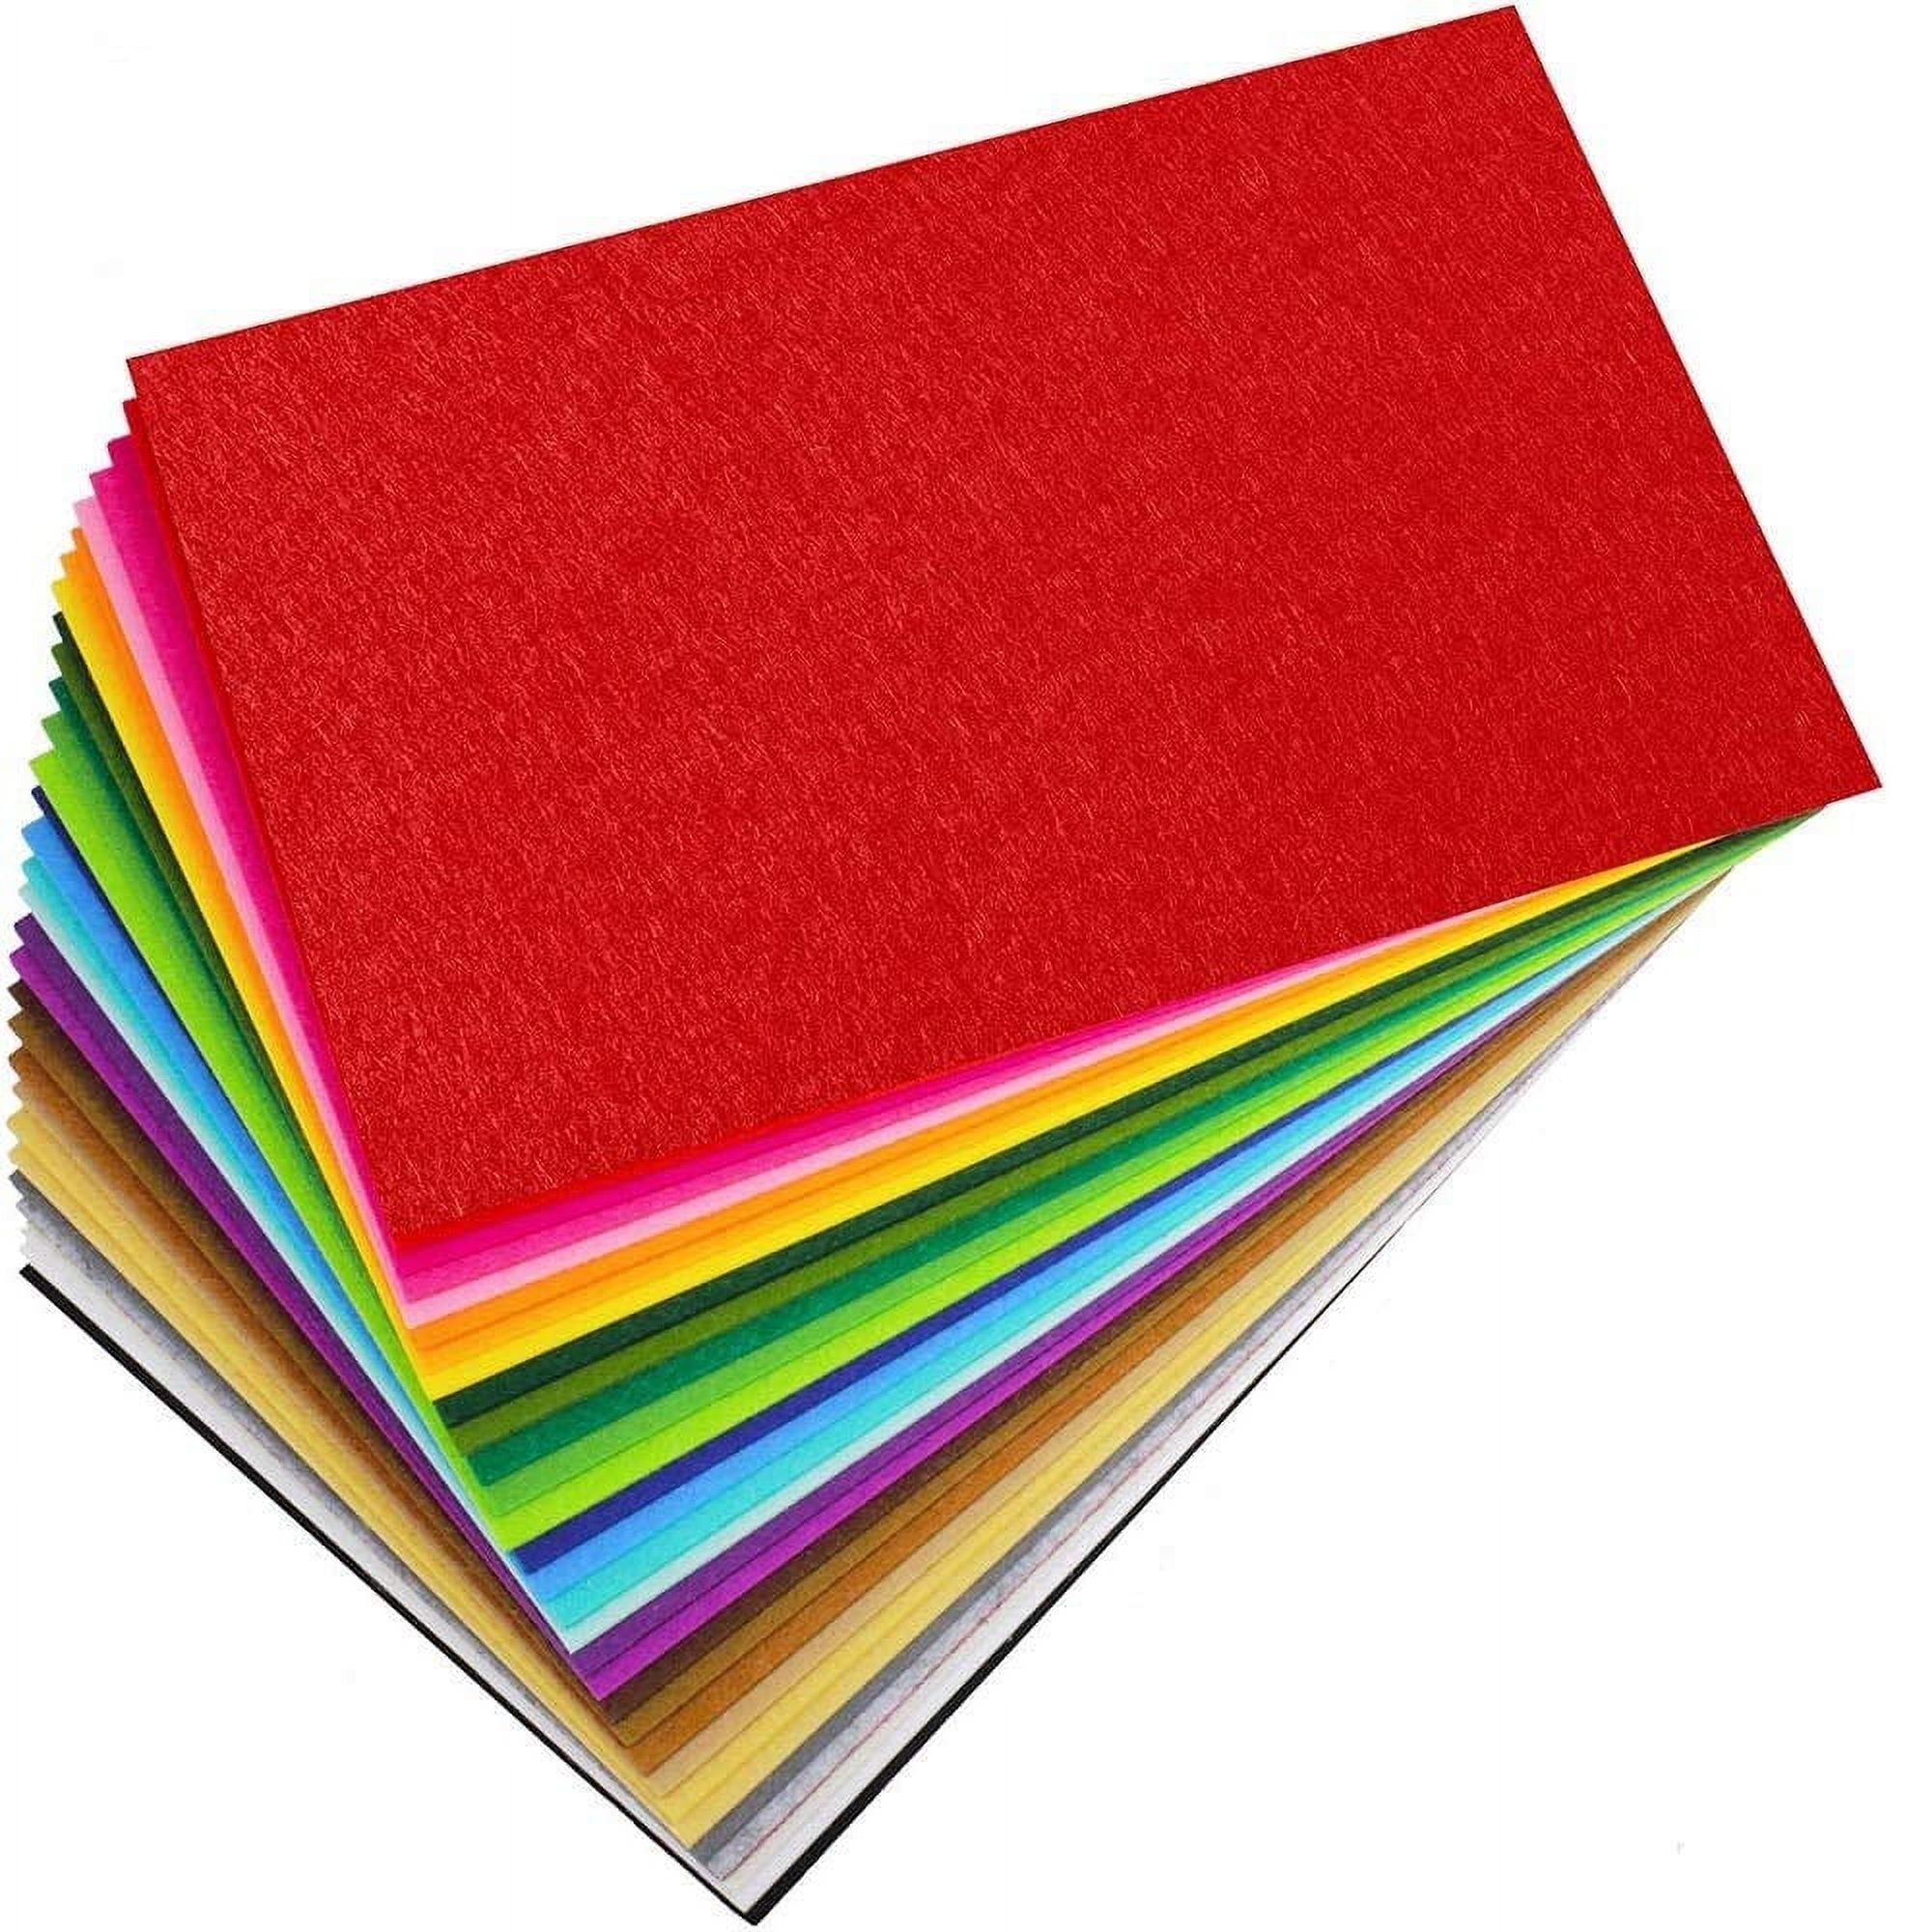 CraftyBook Felt Sheets - 8 x 12in Craft Felt Fabric 40pc Colorful Squares